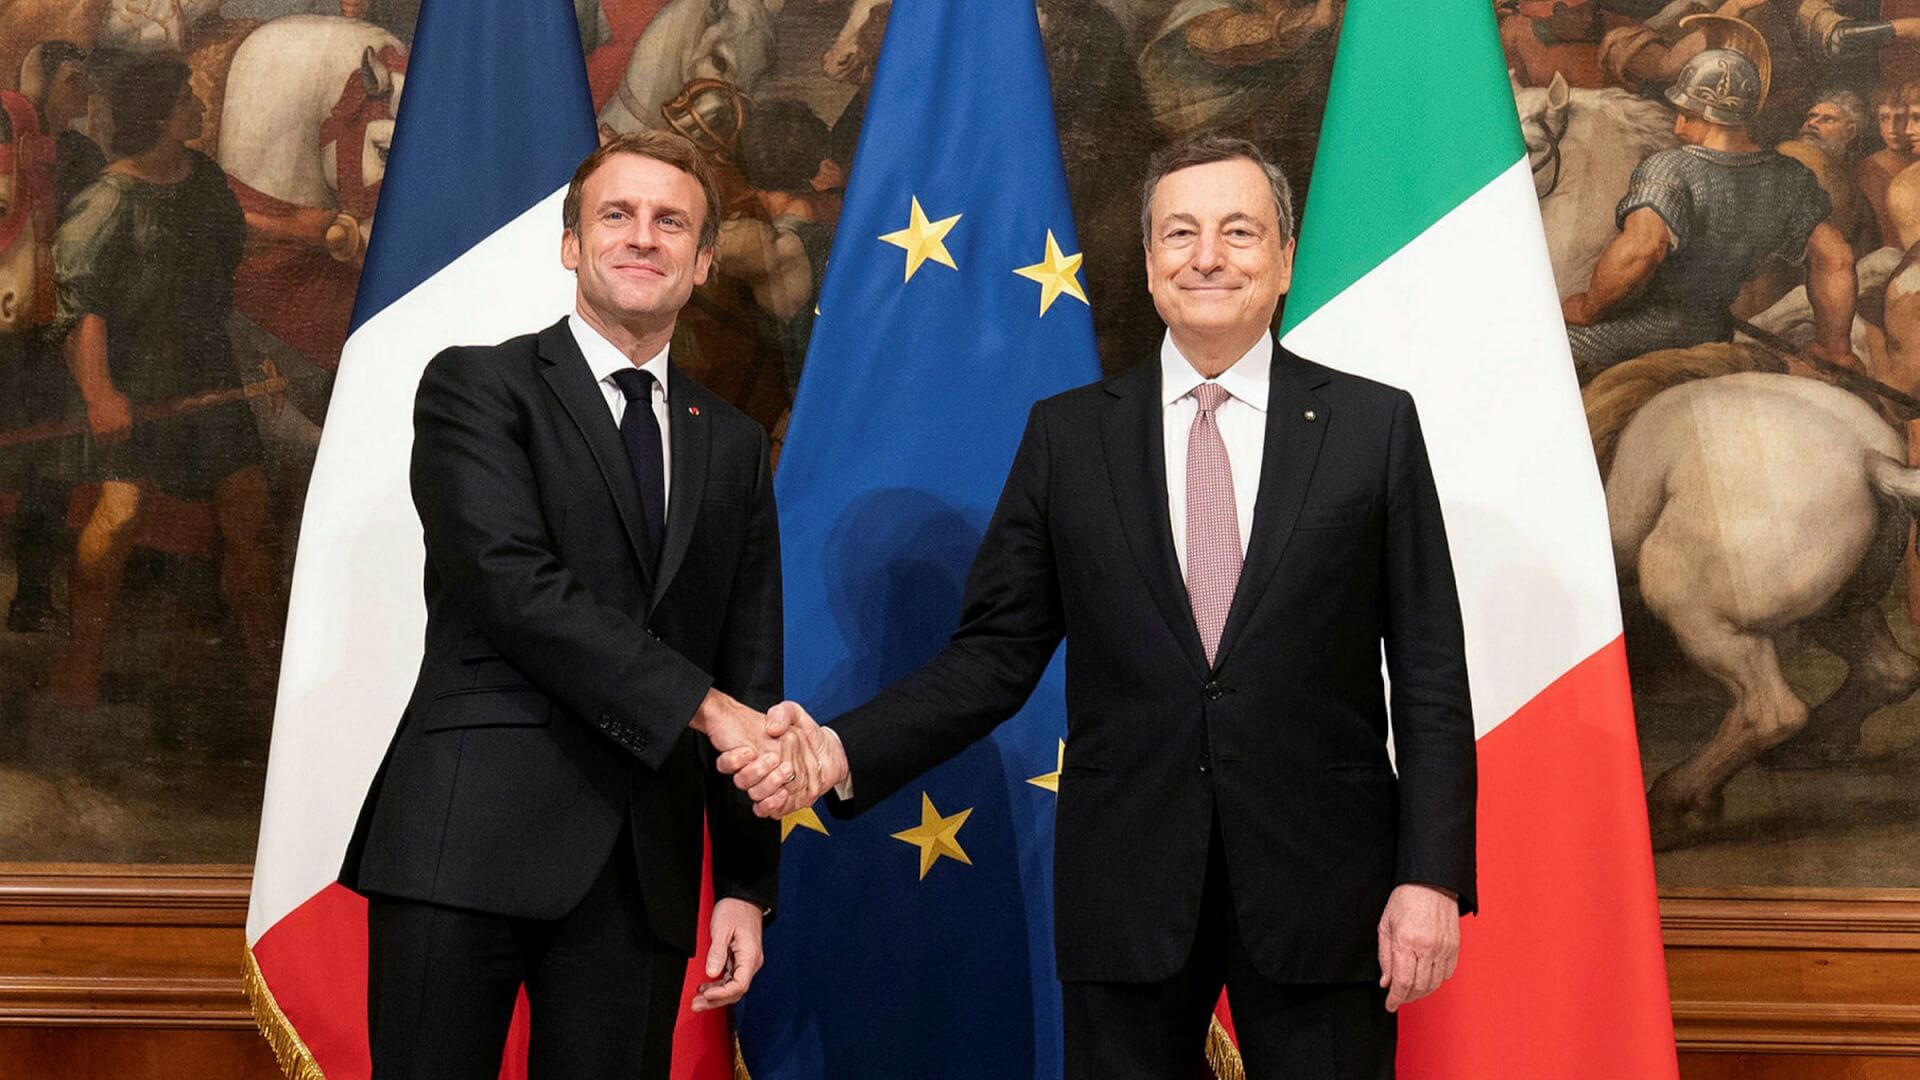 France’s Macron, Italy’s Draghi Call For EU Fiscal Reforms To Allow Greater Investment